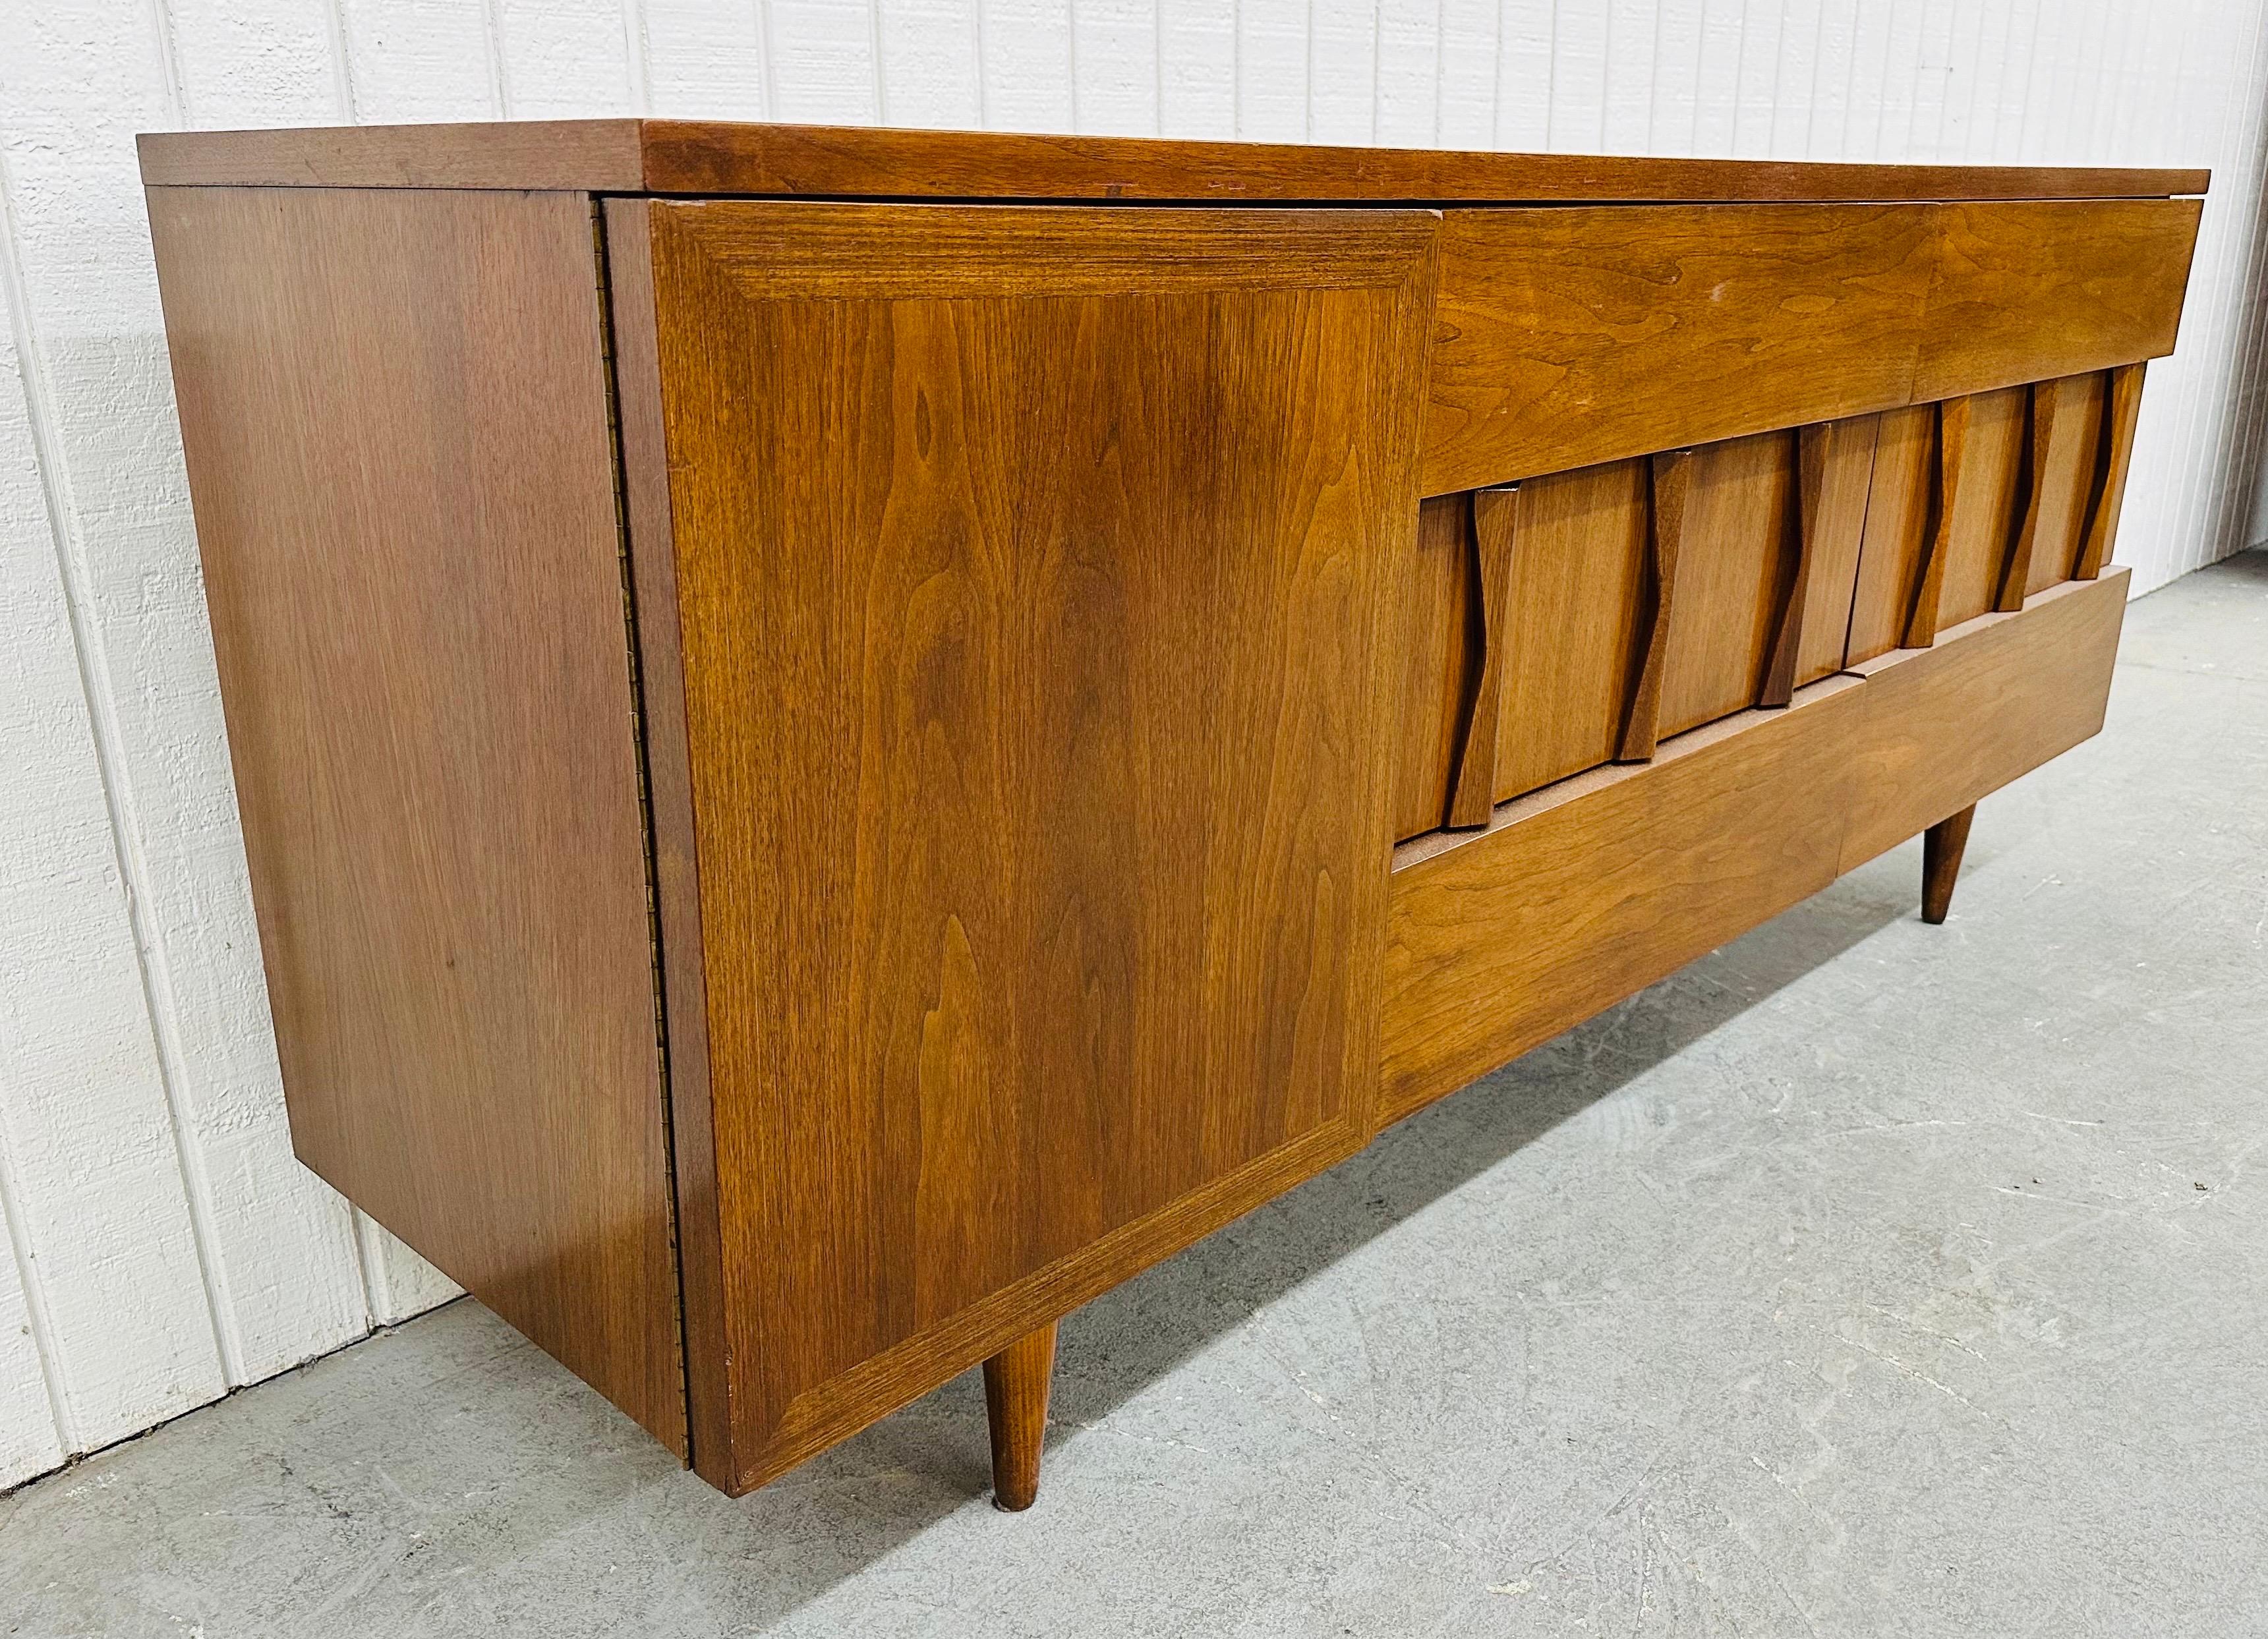 This listing is for a Mid-Century Modern American of Martinsville Dresser. Featuring a straight line design, brutalist front, door on the left that opens up to three hidden drawers, six larger drawers on the right side for storage, modern legs, and